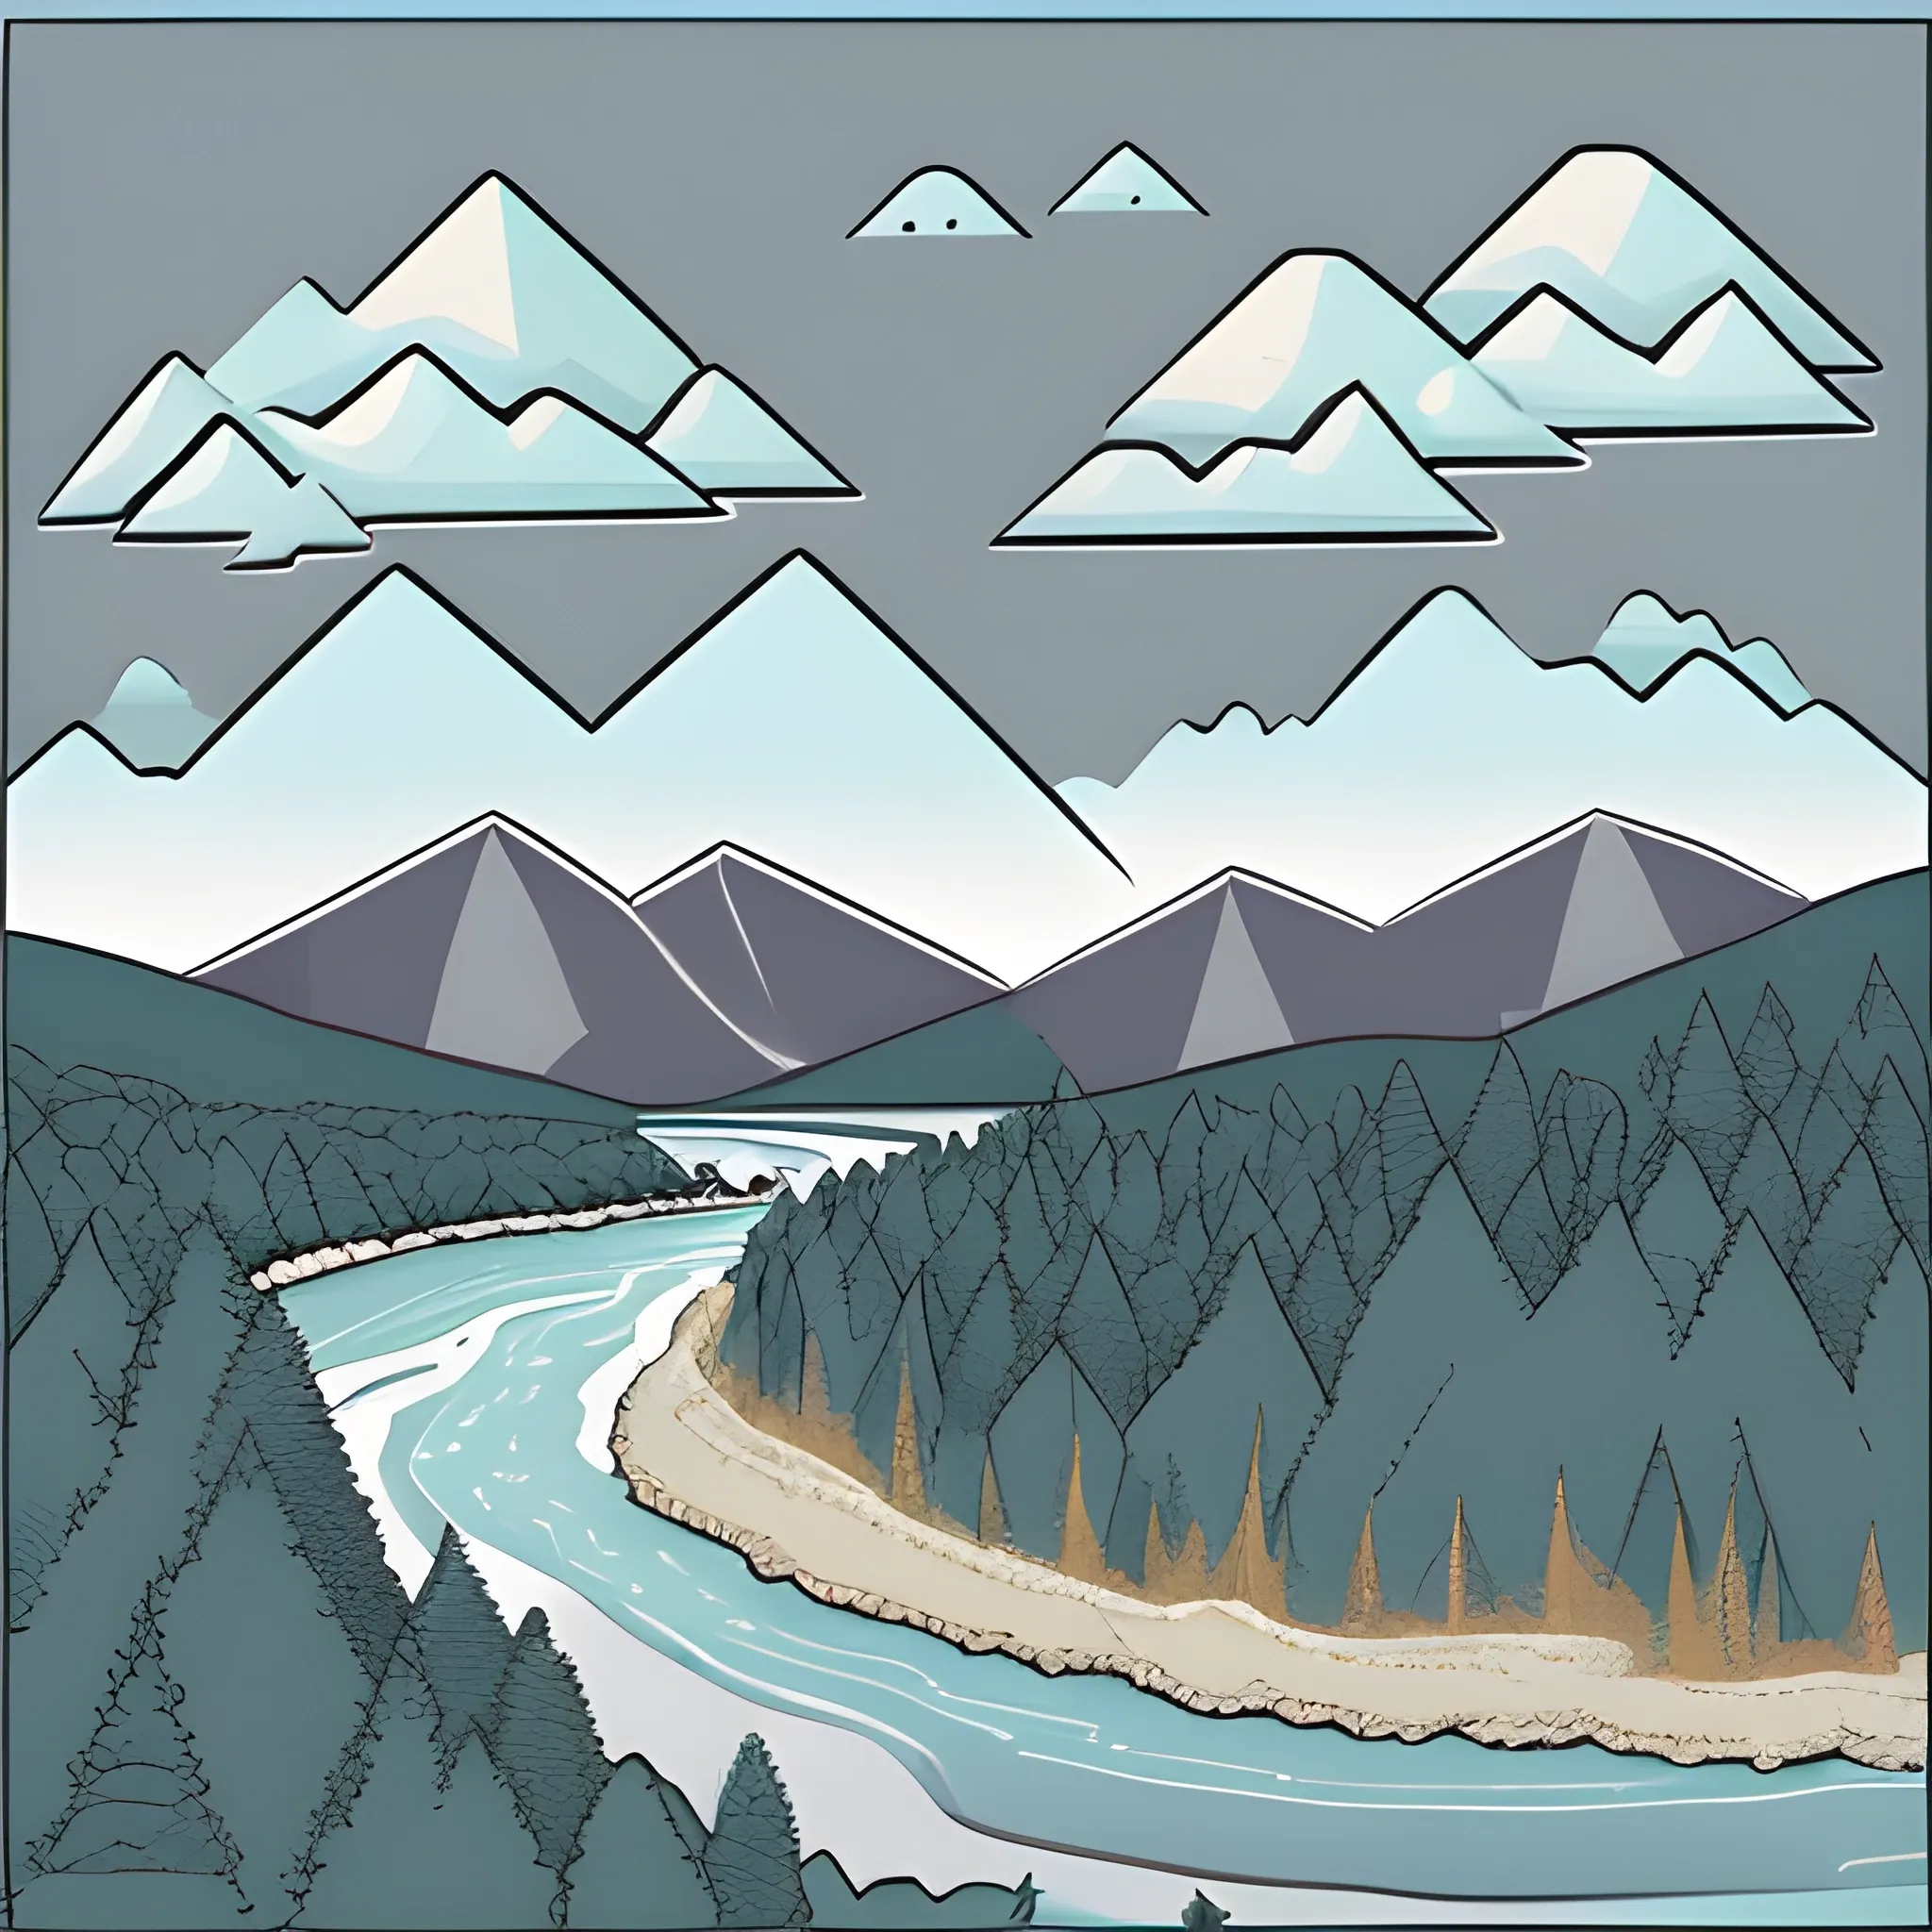 Create a stylized mountain landscape in a vector art style. Focus on a central scene with a river winding through the mountains. The background should feature varied peaks in shades of blue and gray. Line the riverbanks with clusters of evergreen trees. Include subtle cloud formations in the sky, maintaining a clear and serene atmosphere. Use a grainy texture to give the illustration a slightly rough, handcrafted feel. Stick to a color palette of blues, greens, and soft pastels.